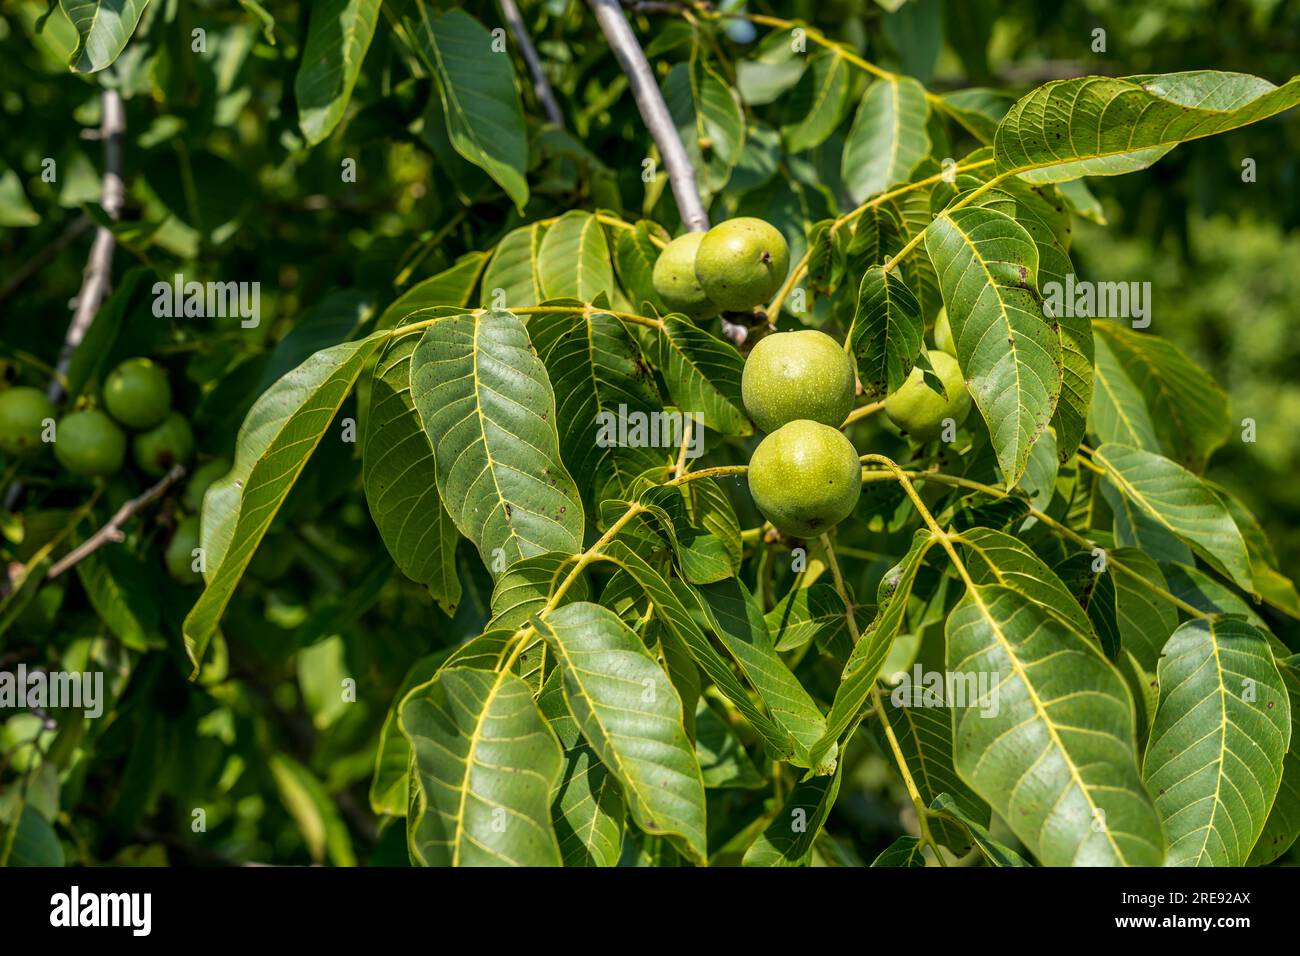 a few bunches of unripe walnuts in a green shell on the branches of a tree with green leaves Júglans régia Stock Photo